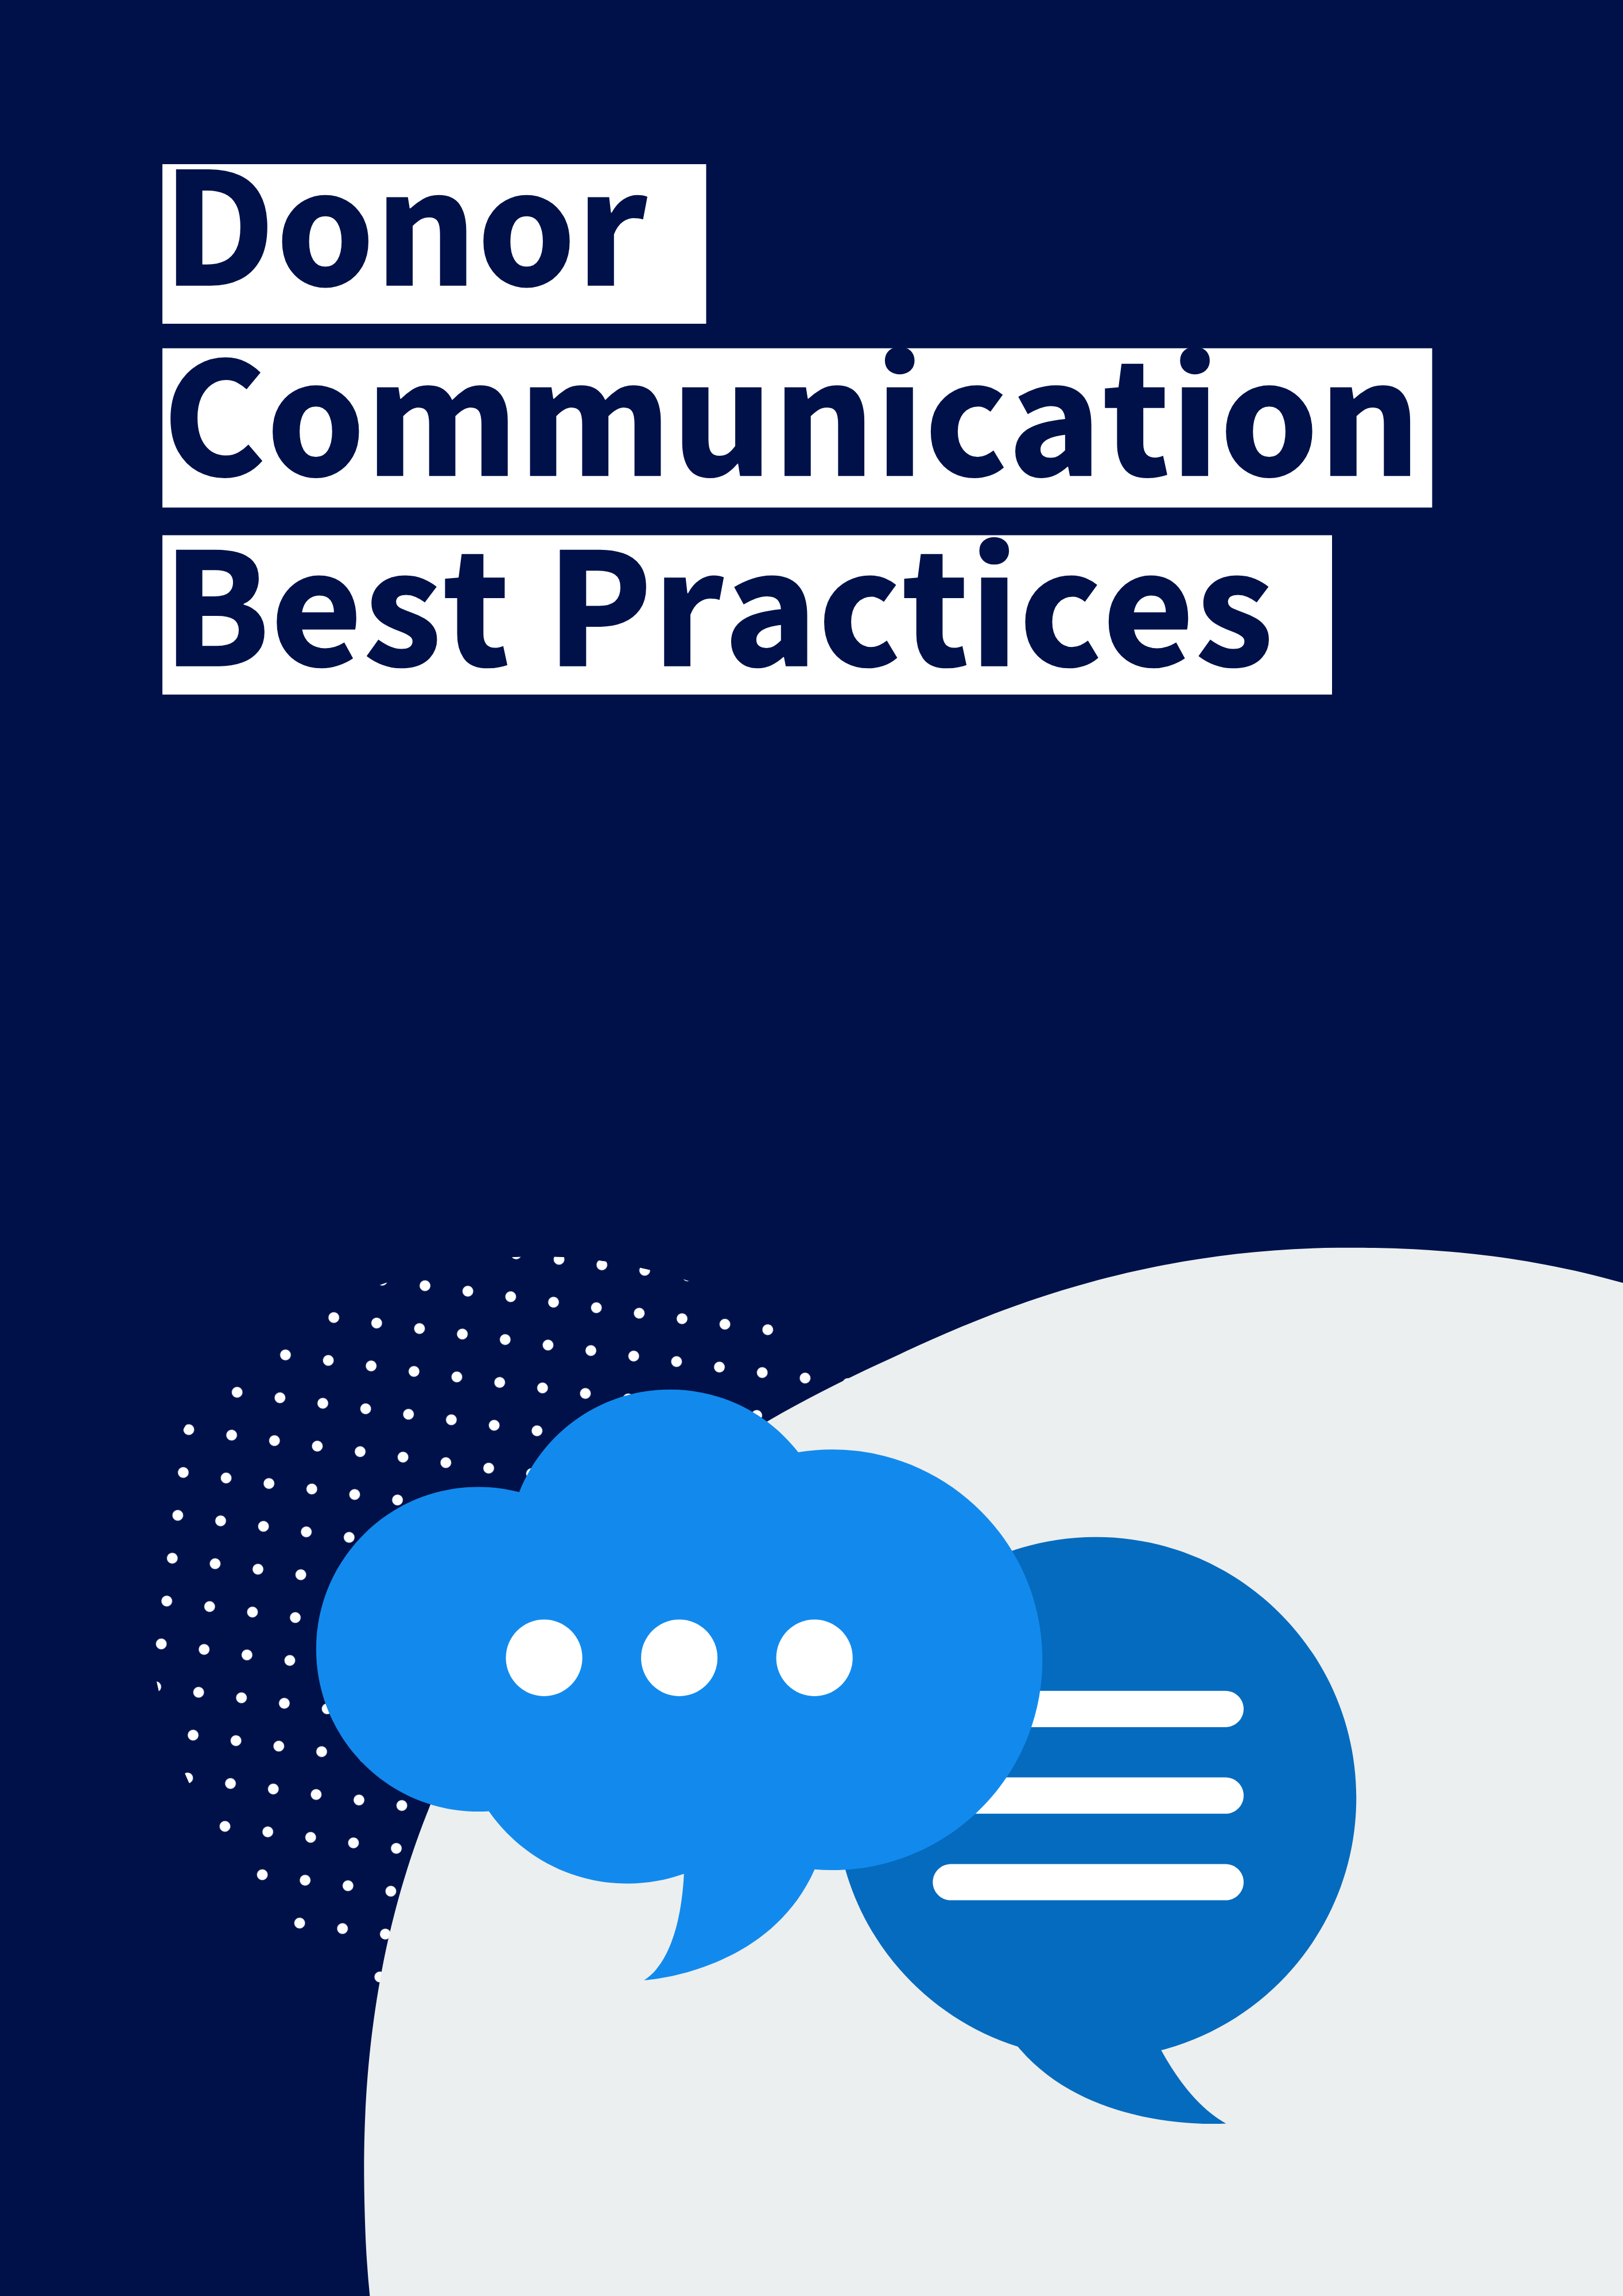 Donor Communication Best Practices